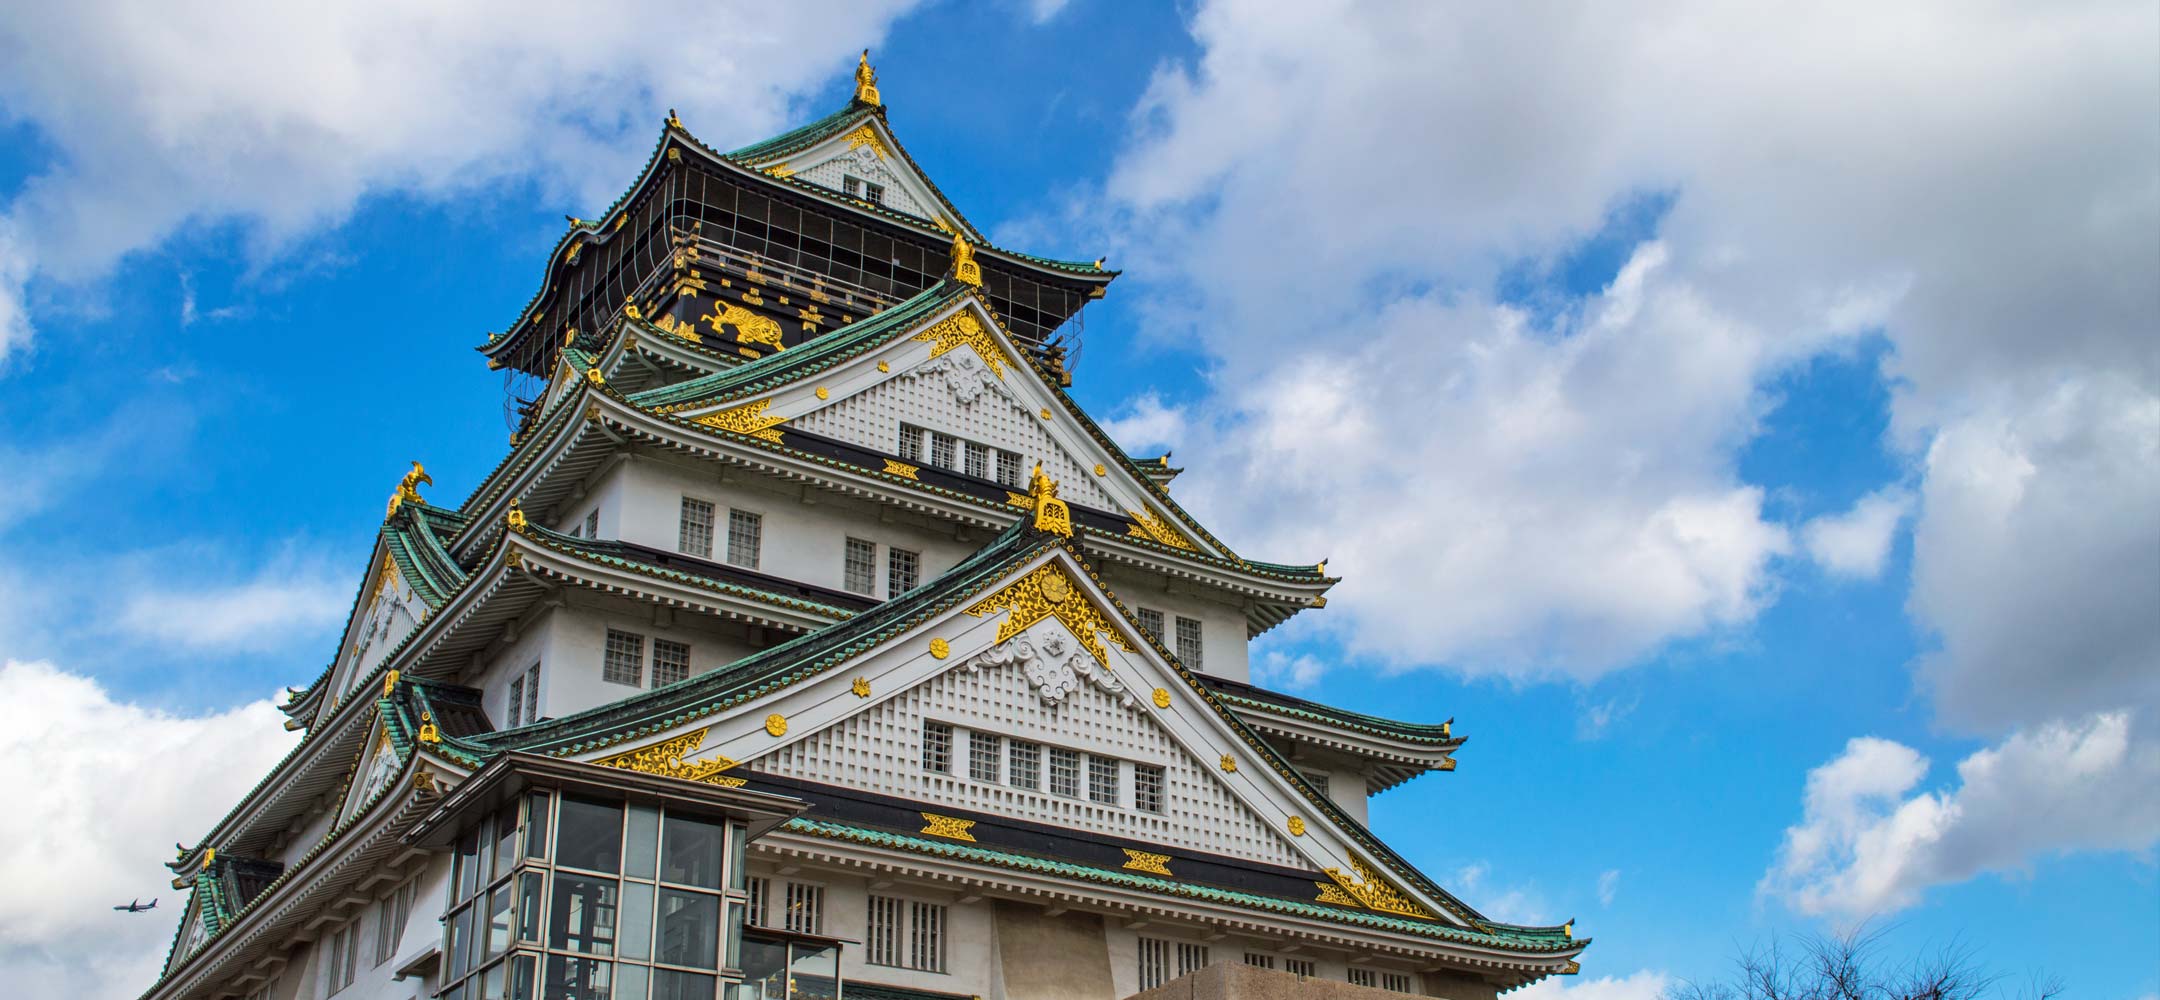 Grab 2015 by the horns – InsideJapan Tours recommends where to go and why  during the Asian Year of the Ram 